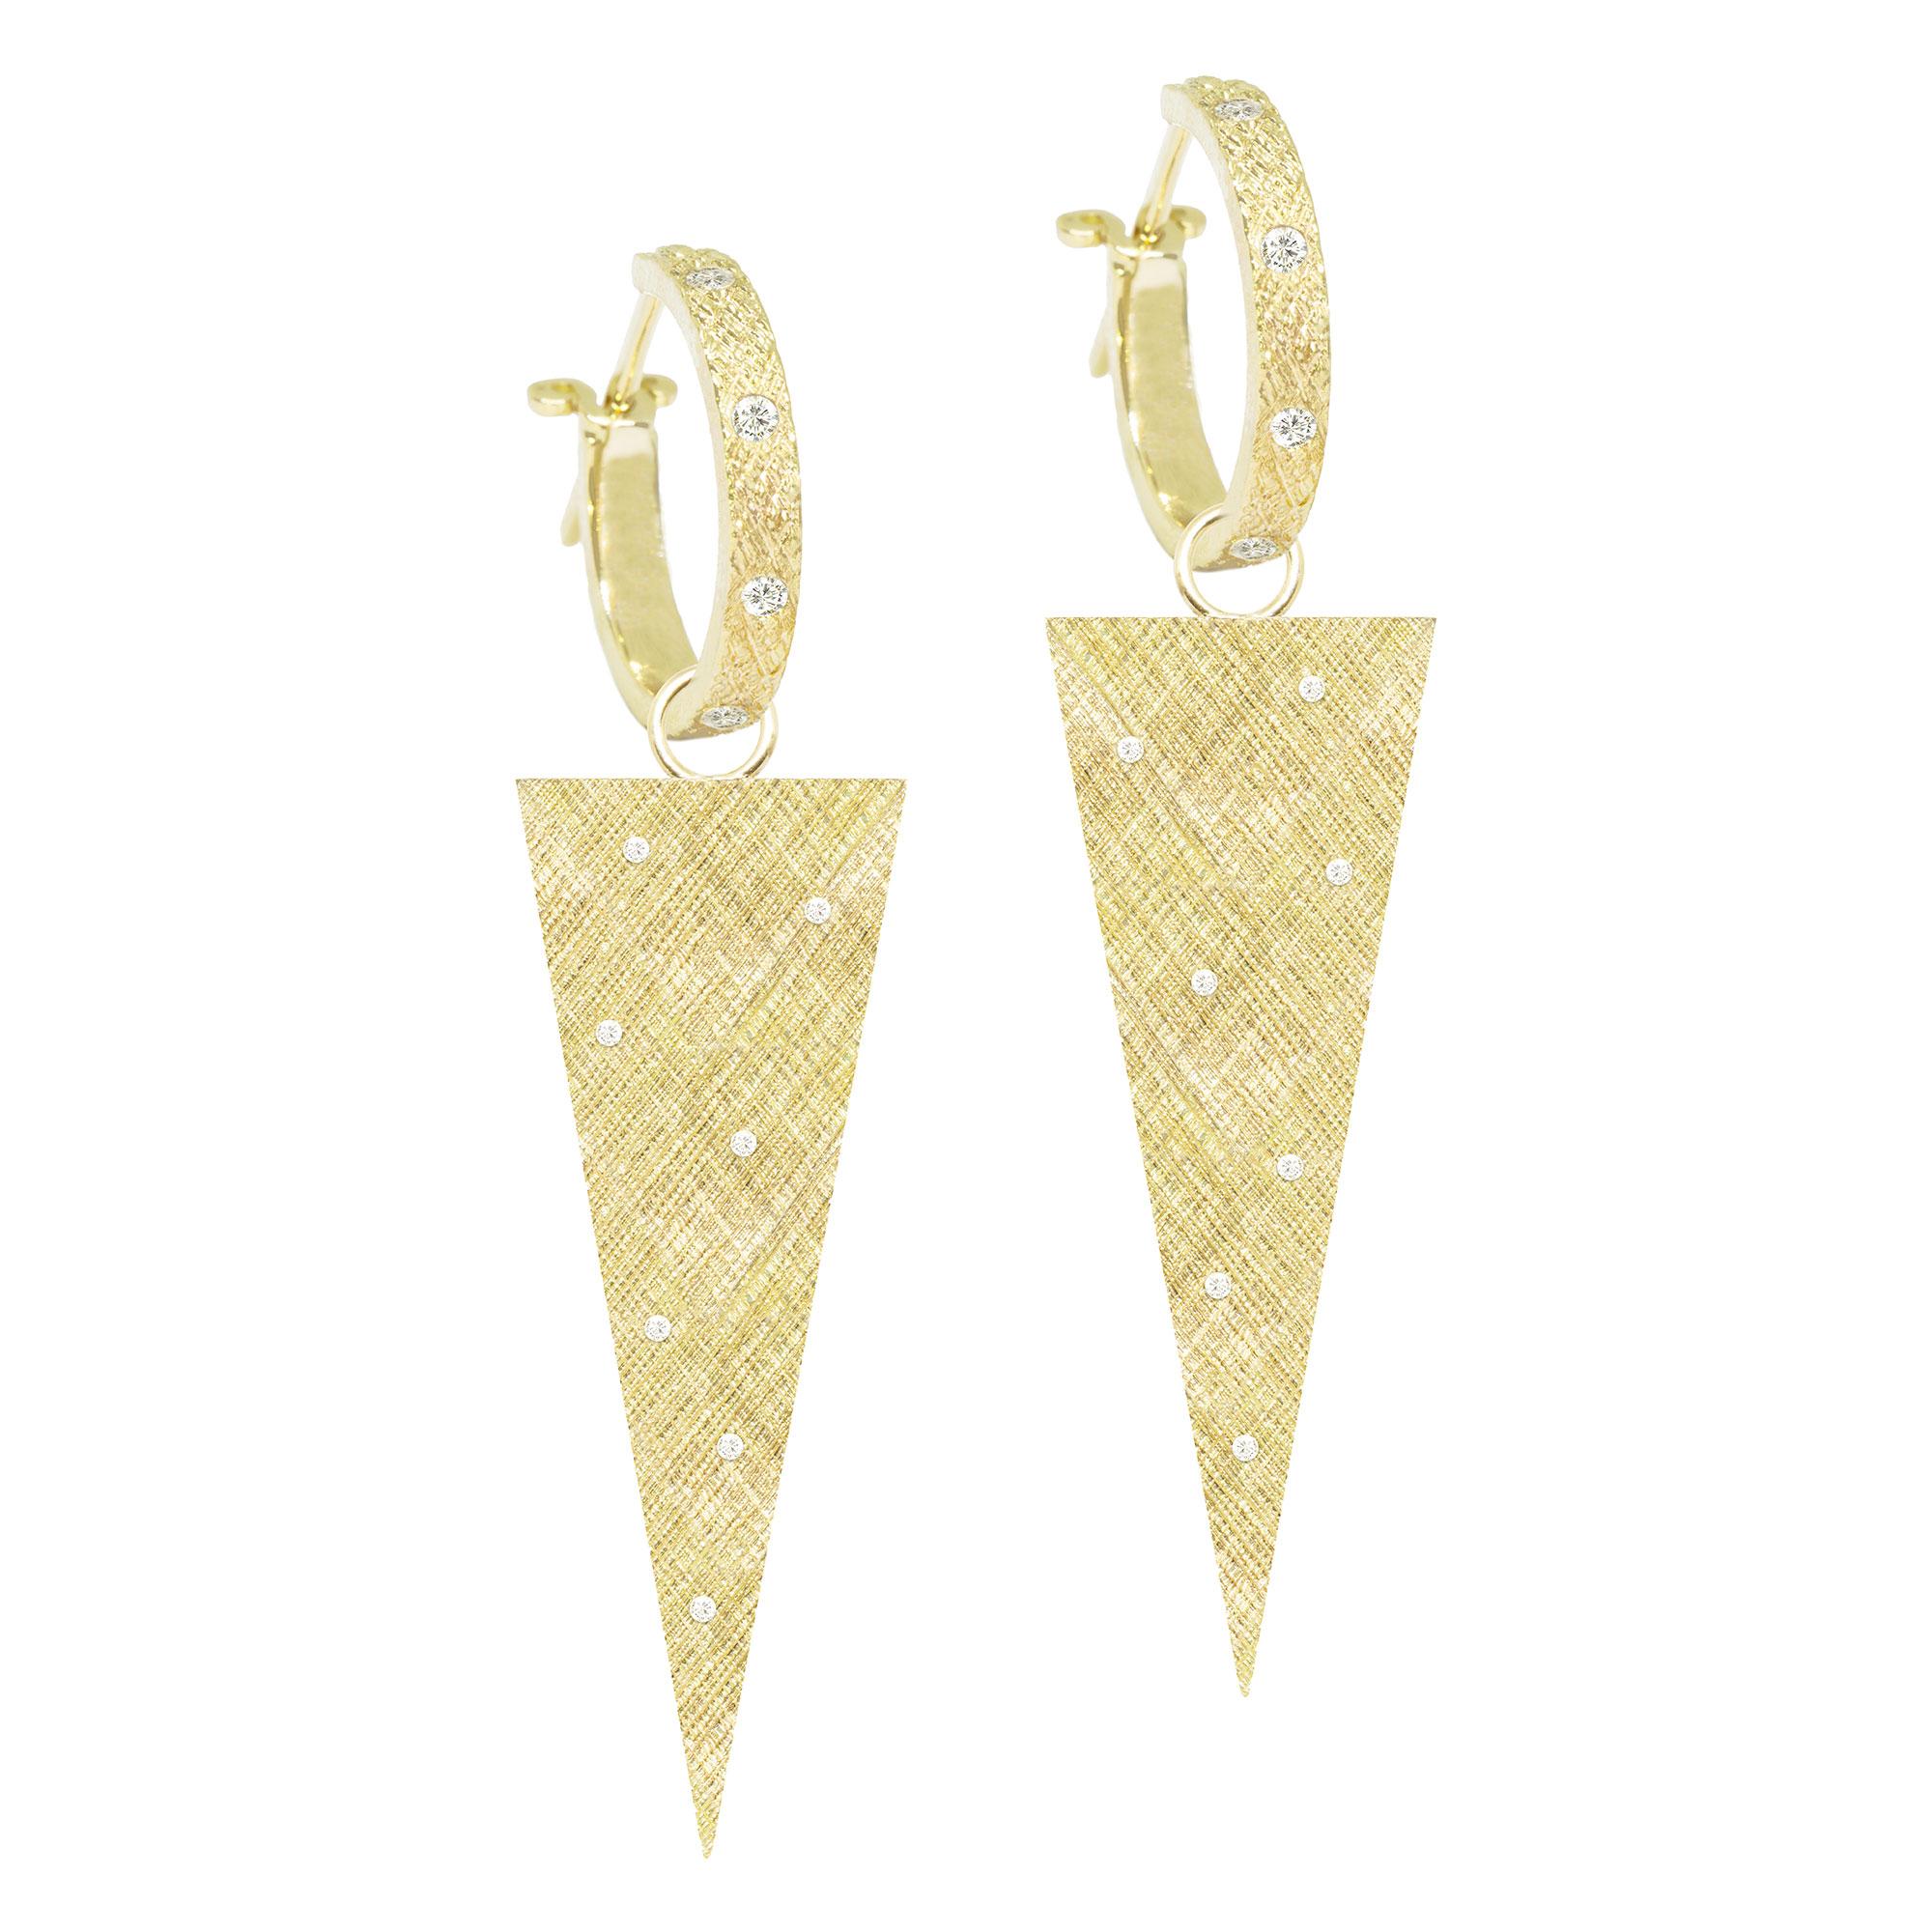 Defined by a hand-hammered crosshatch pattern, sparkling diamonds, and a cool, spiky shape, the Florentine Triangle 15x40mm Gold Charms add gorgeous shimmer and texture—and a little edge—to your look. And when you mix and match with our other